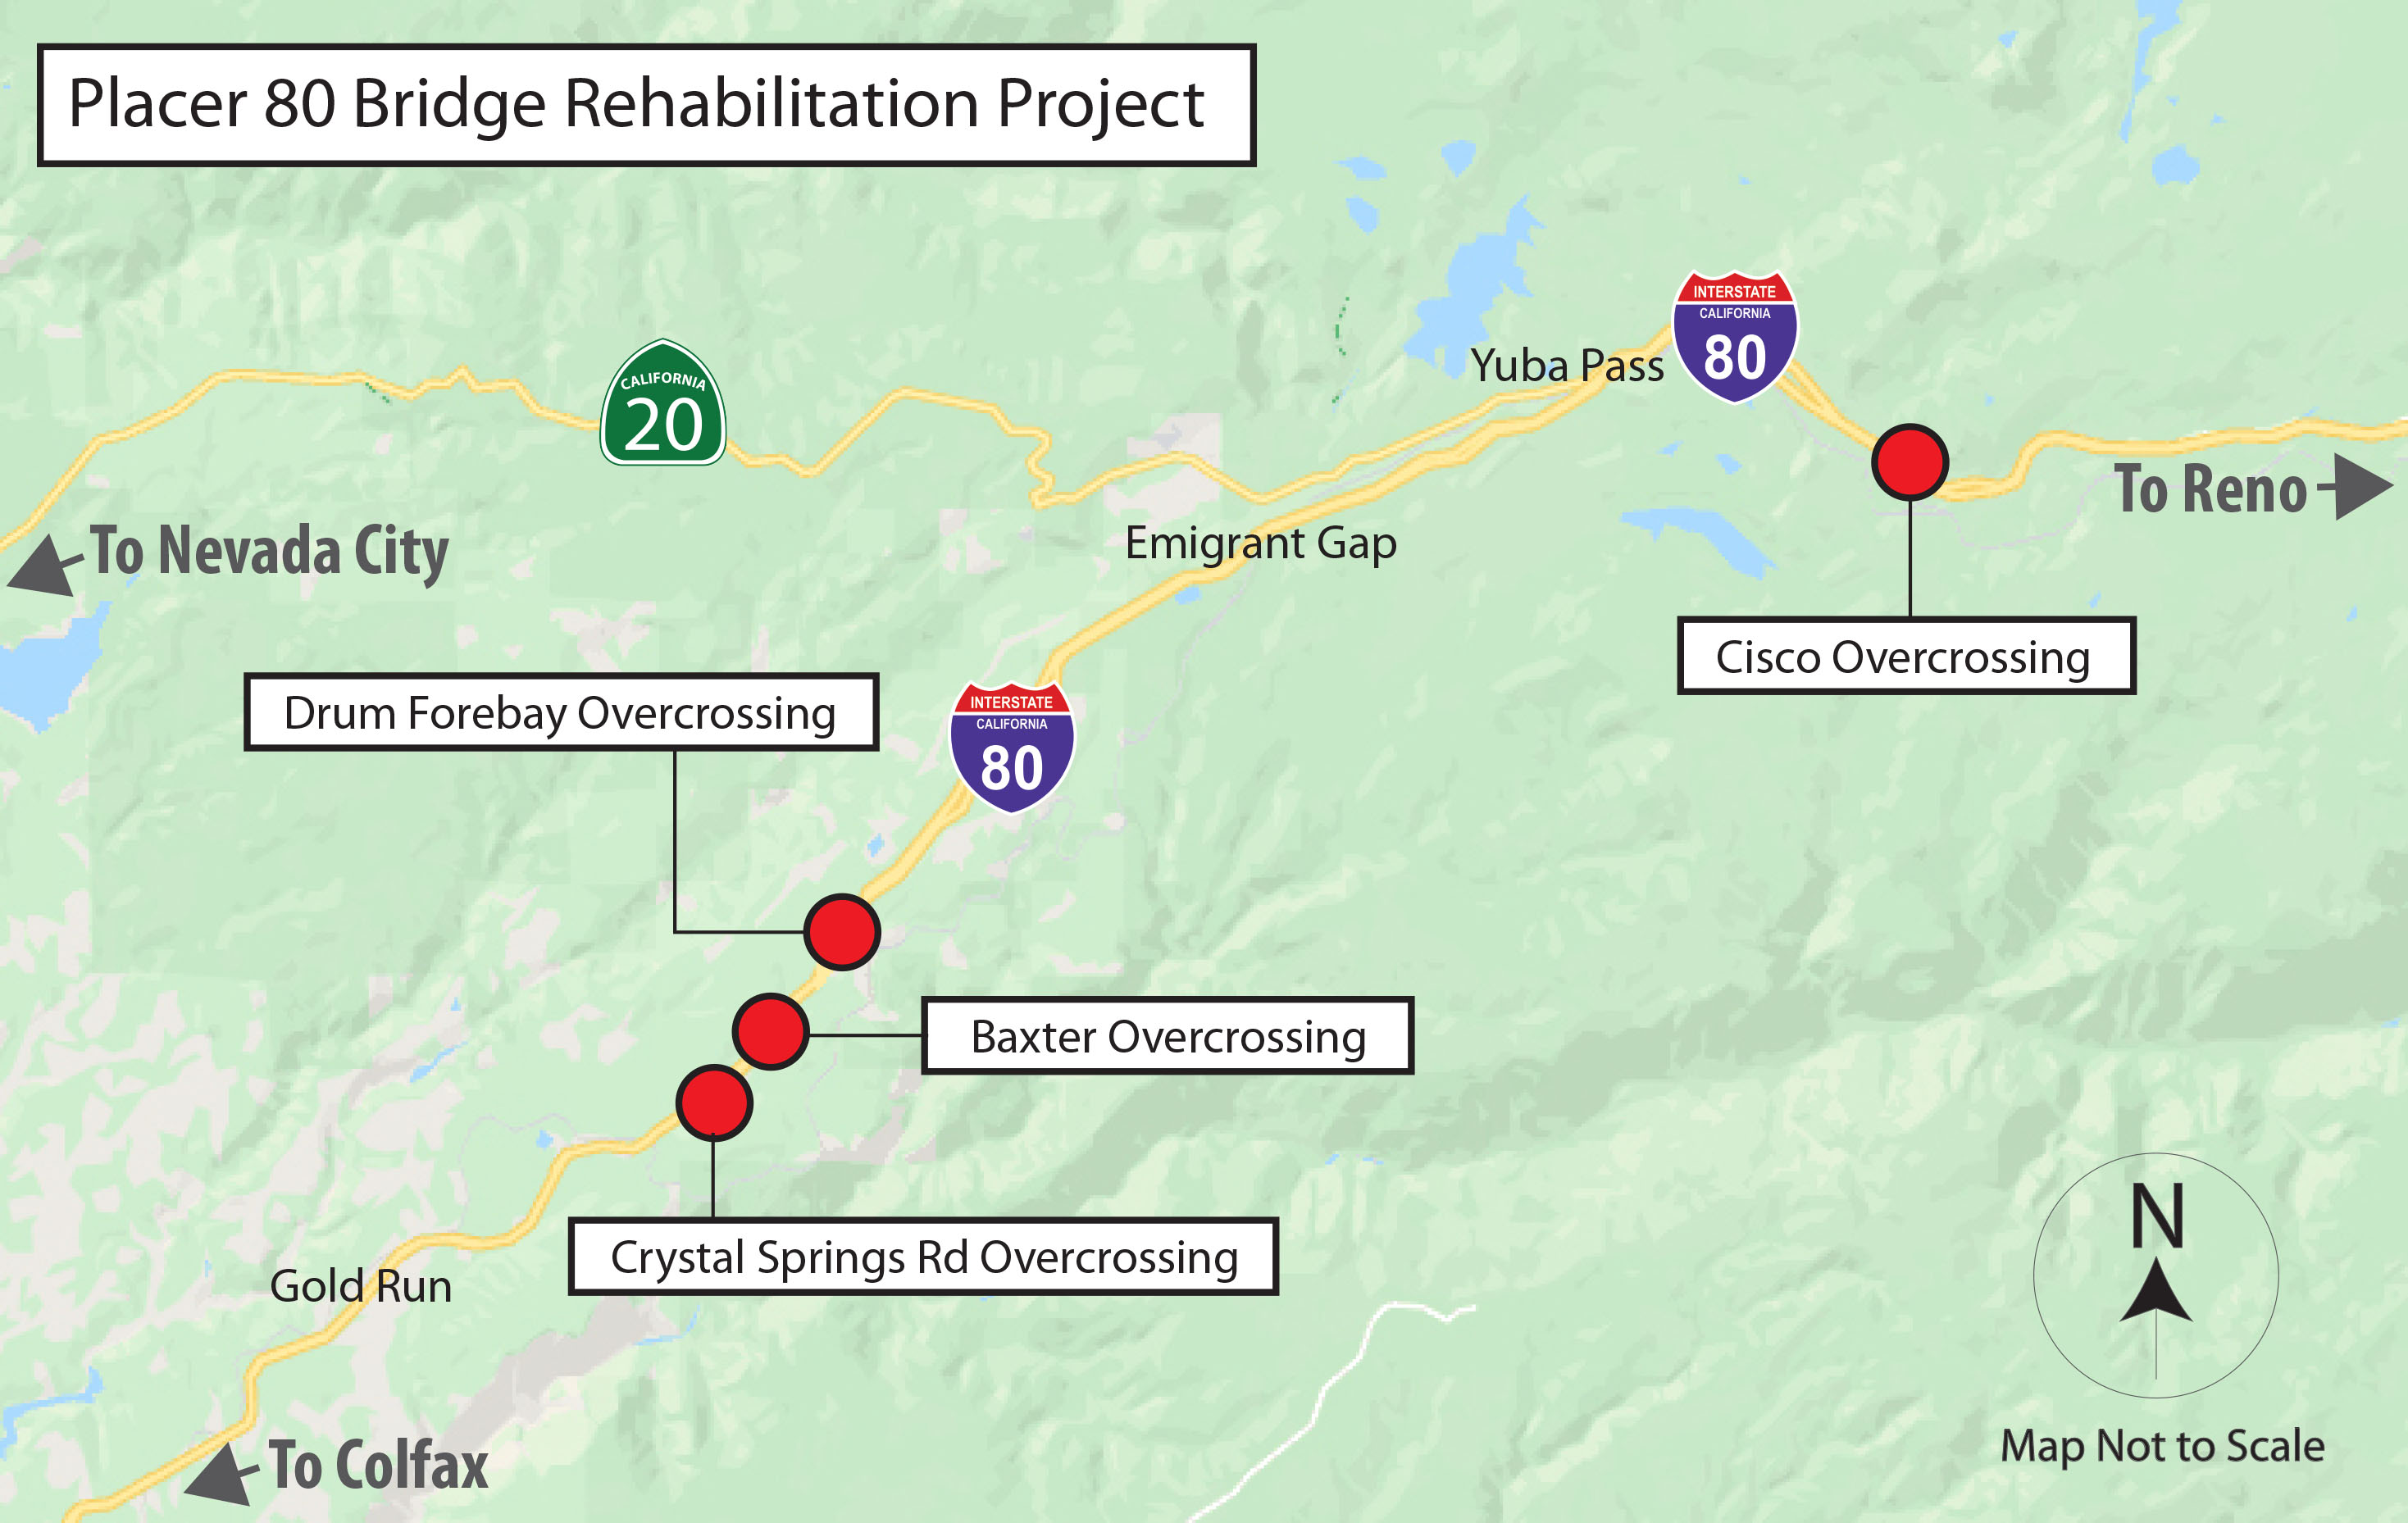 Map showing the location of four bridge overcrossings that are being demolished and rebuilt as part of the I-80 Bridge Rehabilitation Project. The $57 million project is replacing overcrossings in Placer County at Crystal Springs, Baxter, Drum Forebay and Cisco Grove.